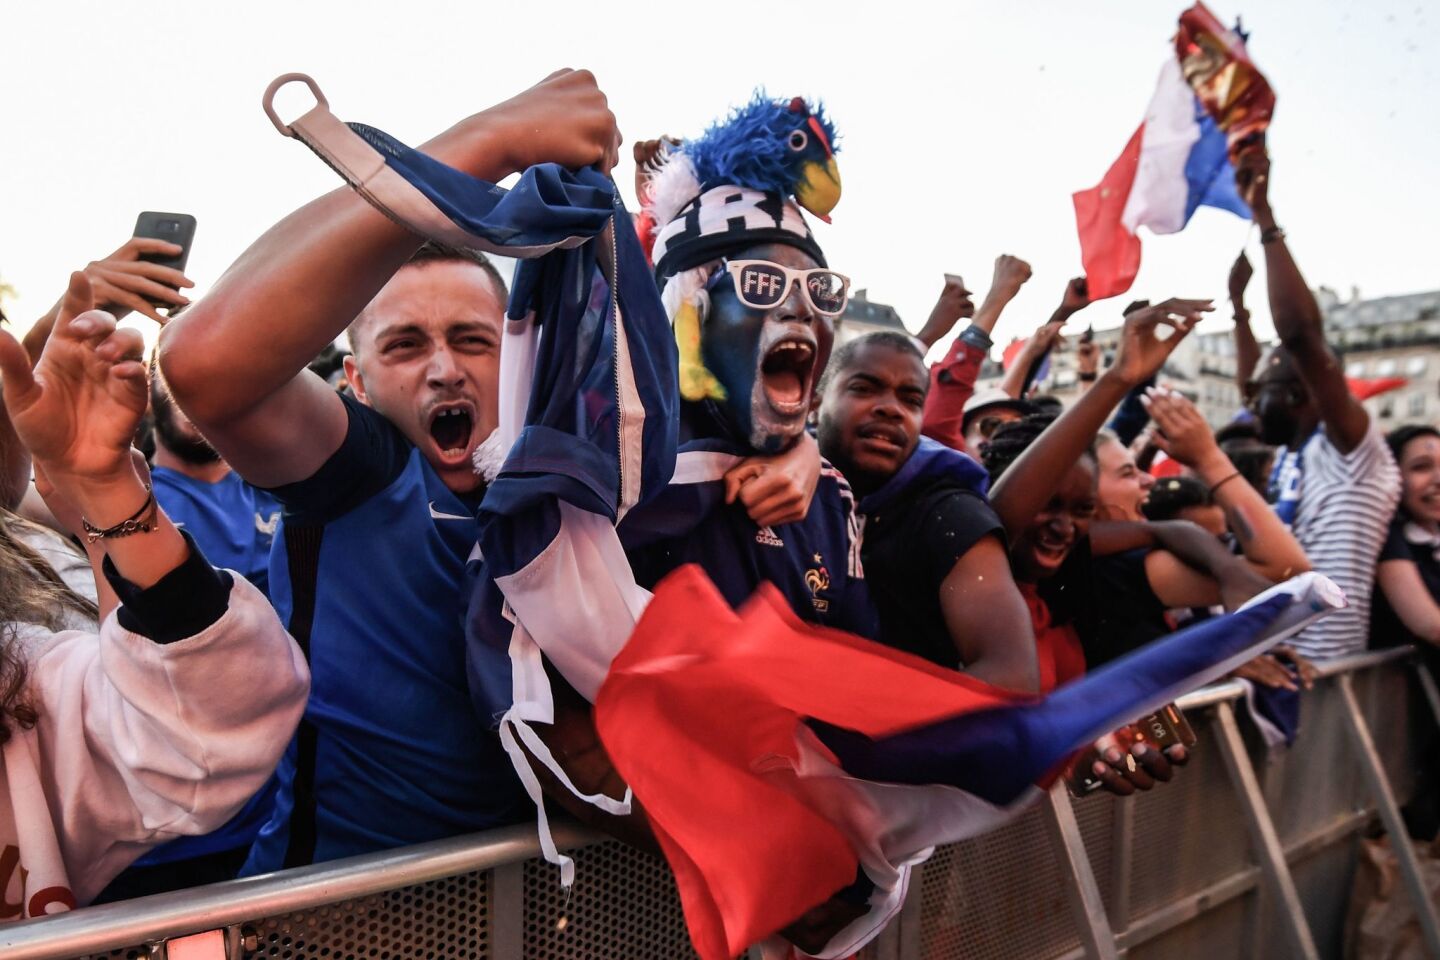 Spectators in a fan zone in Paris celebrate France's first goal in Tuesday's World Cup semifinals match.